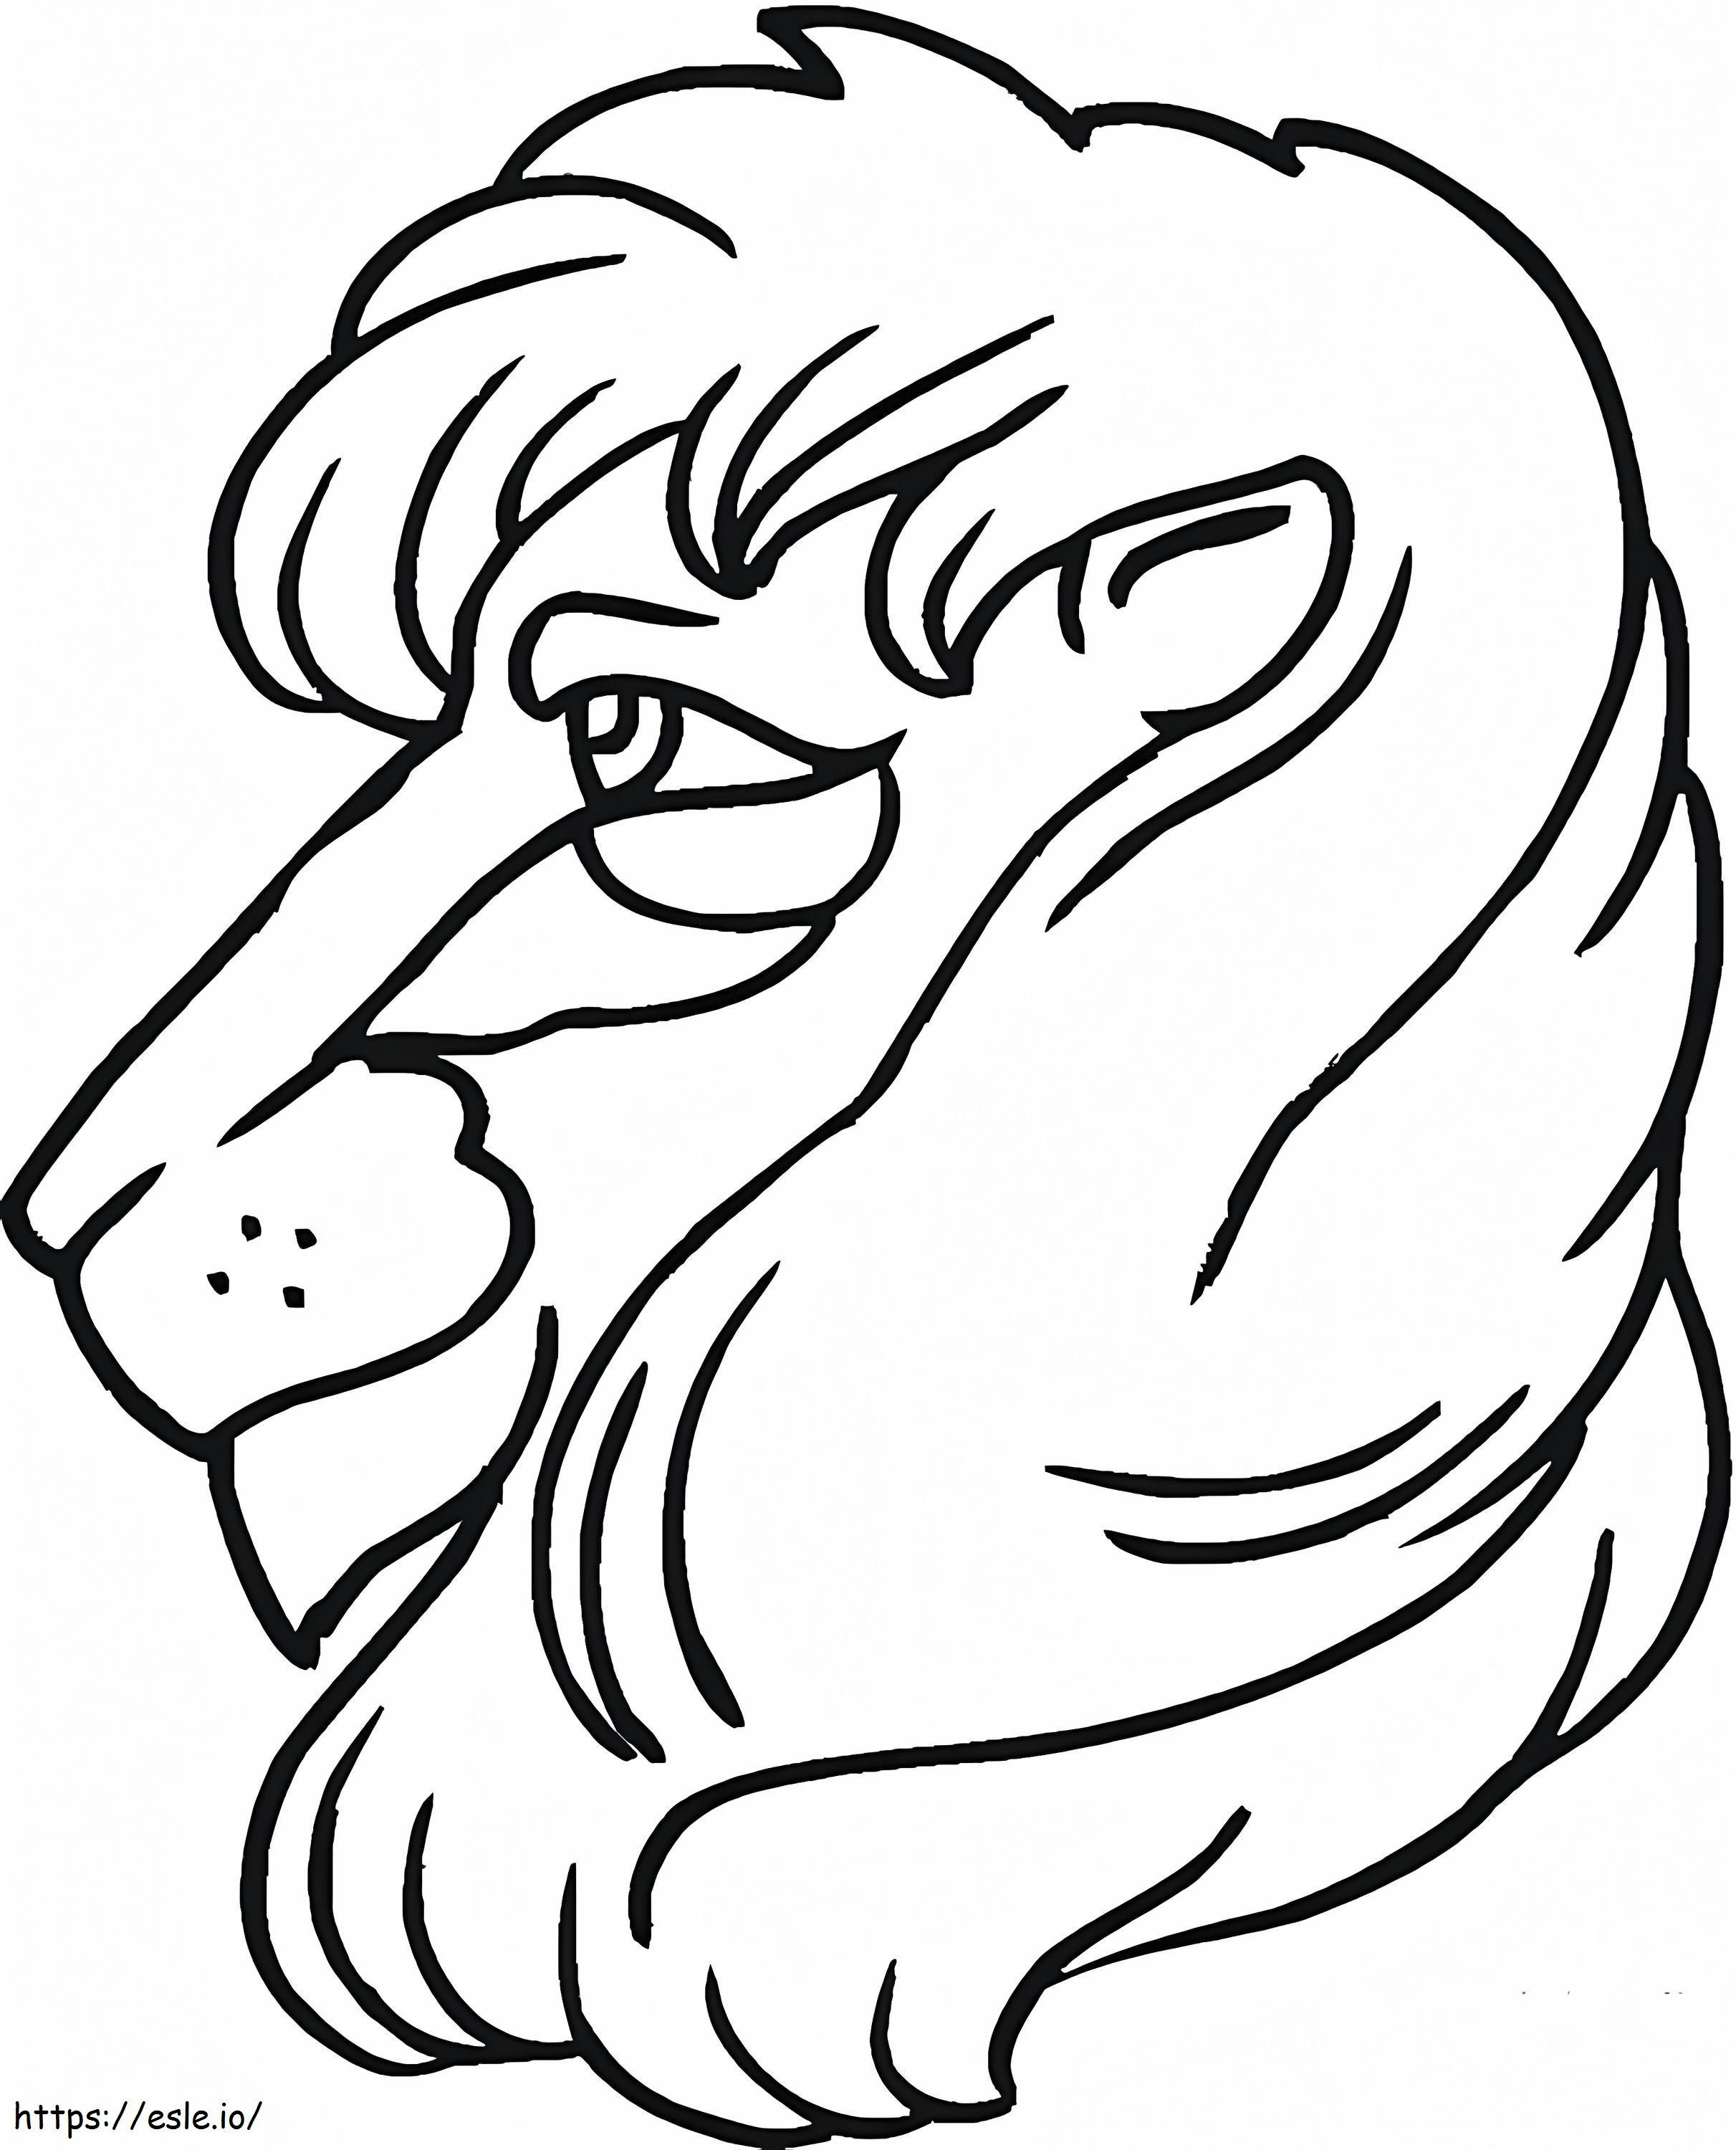 Lion Head coloring page